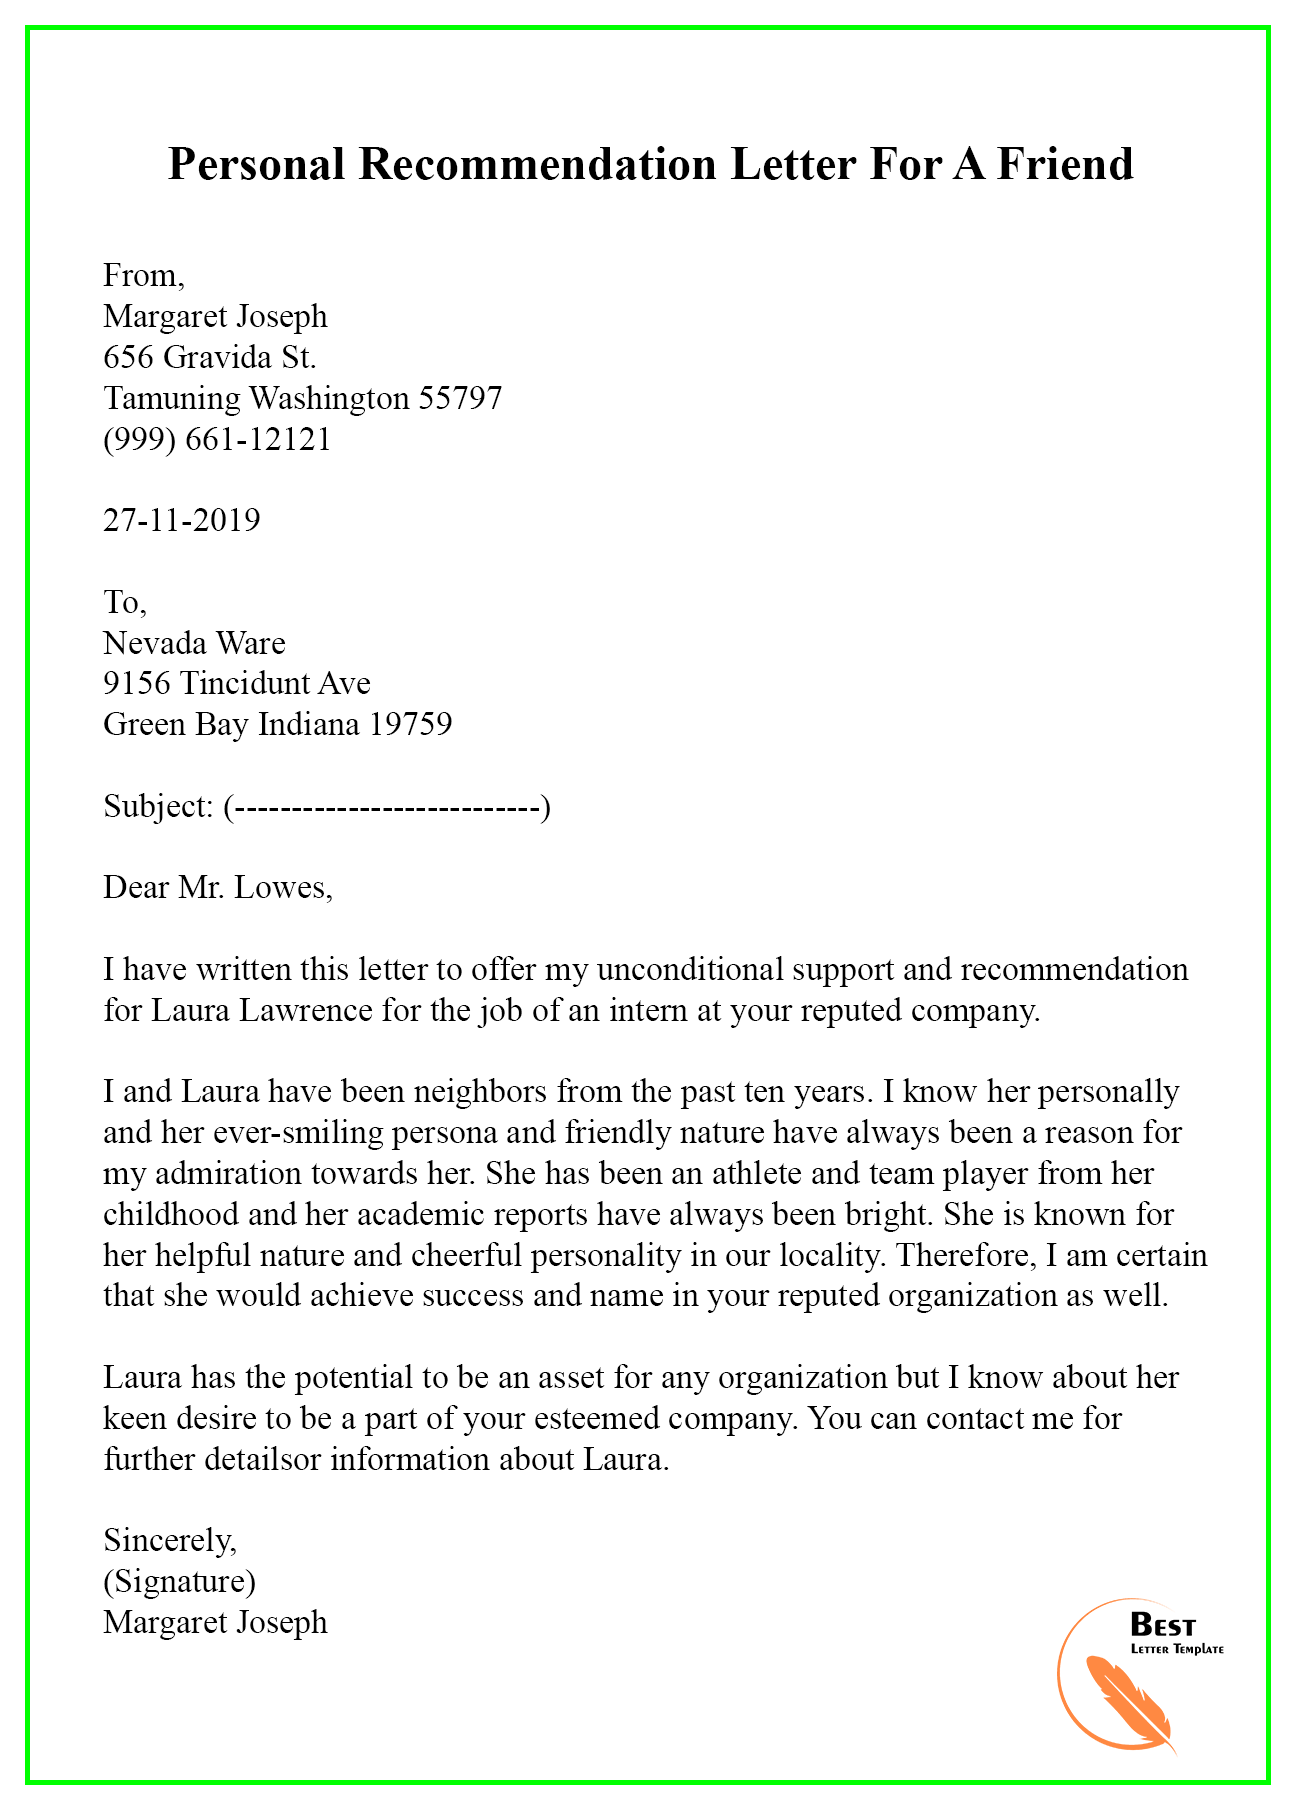 Personal Recommendation Letter Template from bestlettertemplate.com